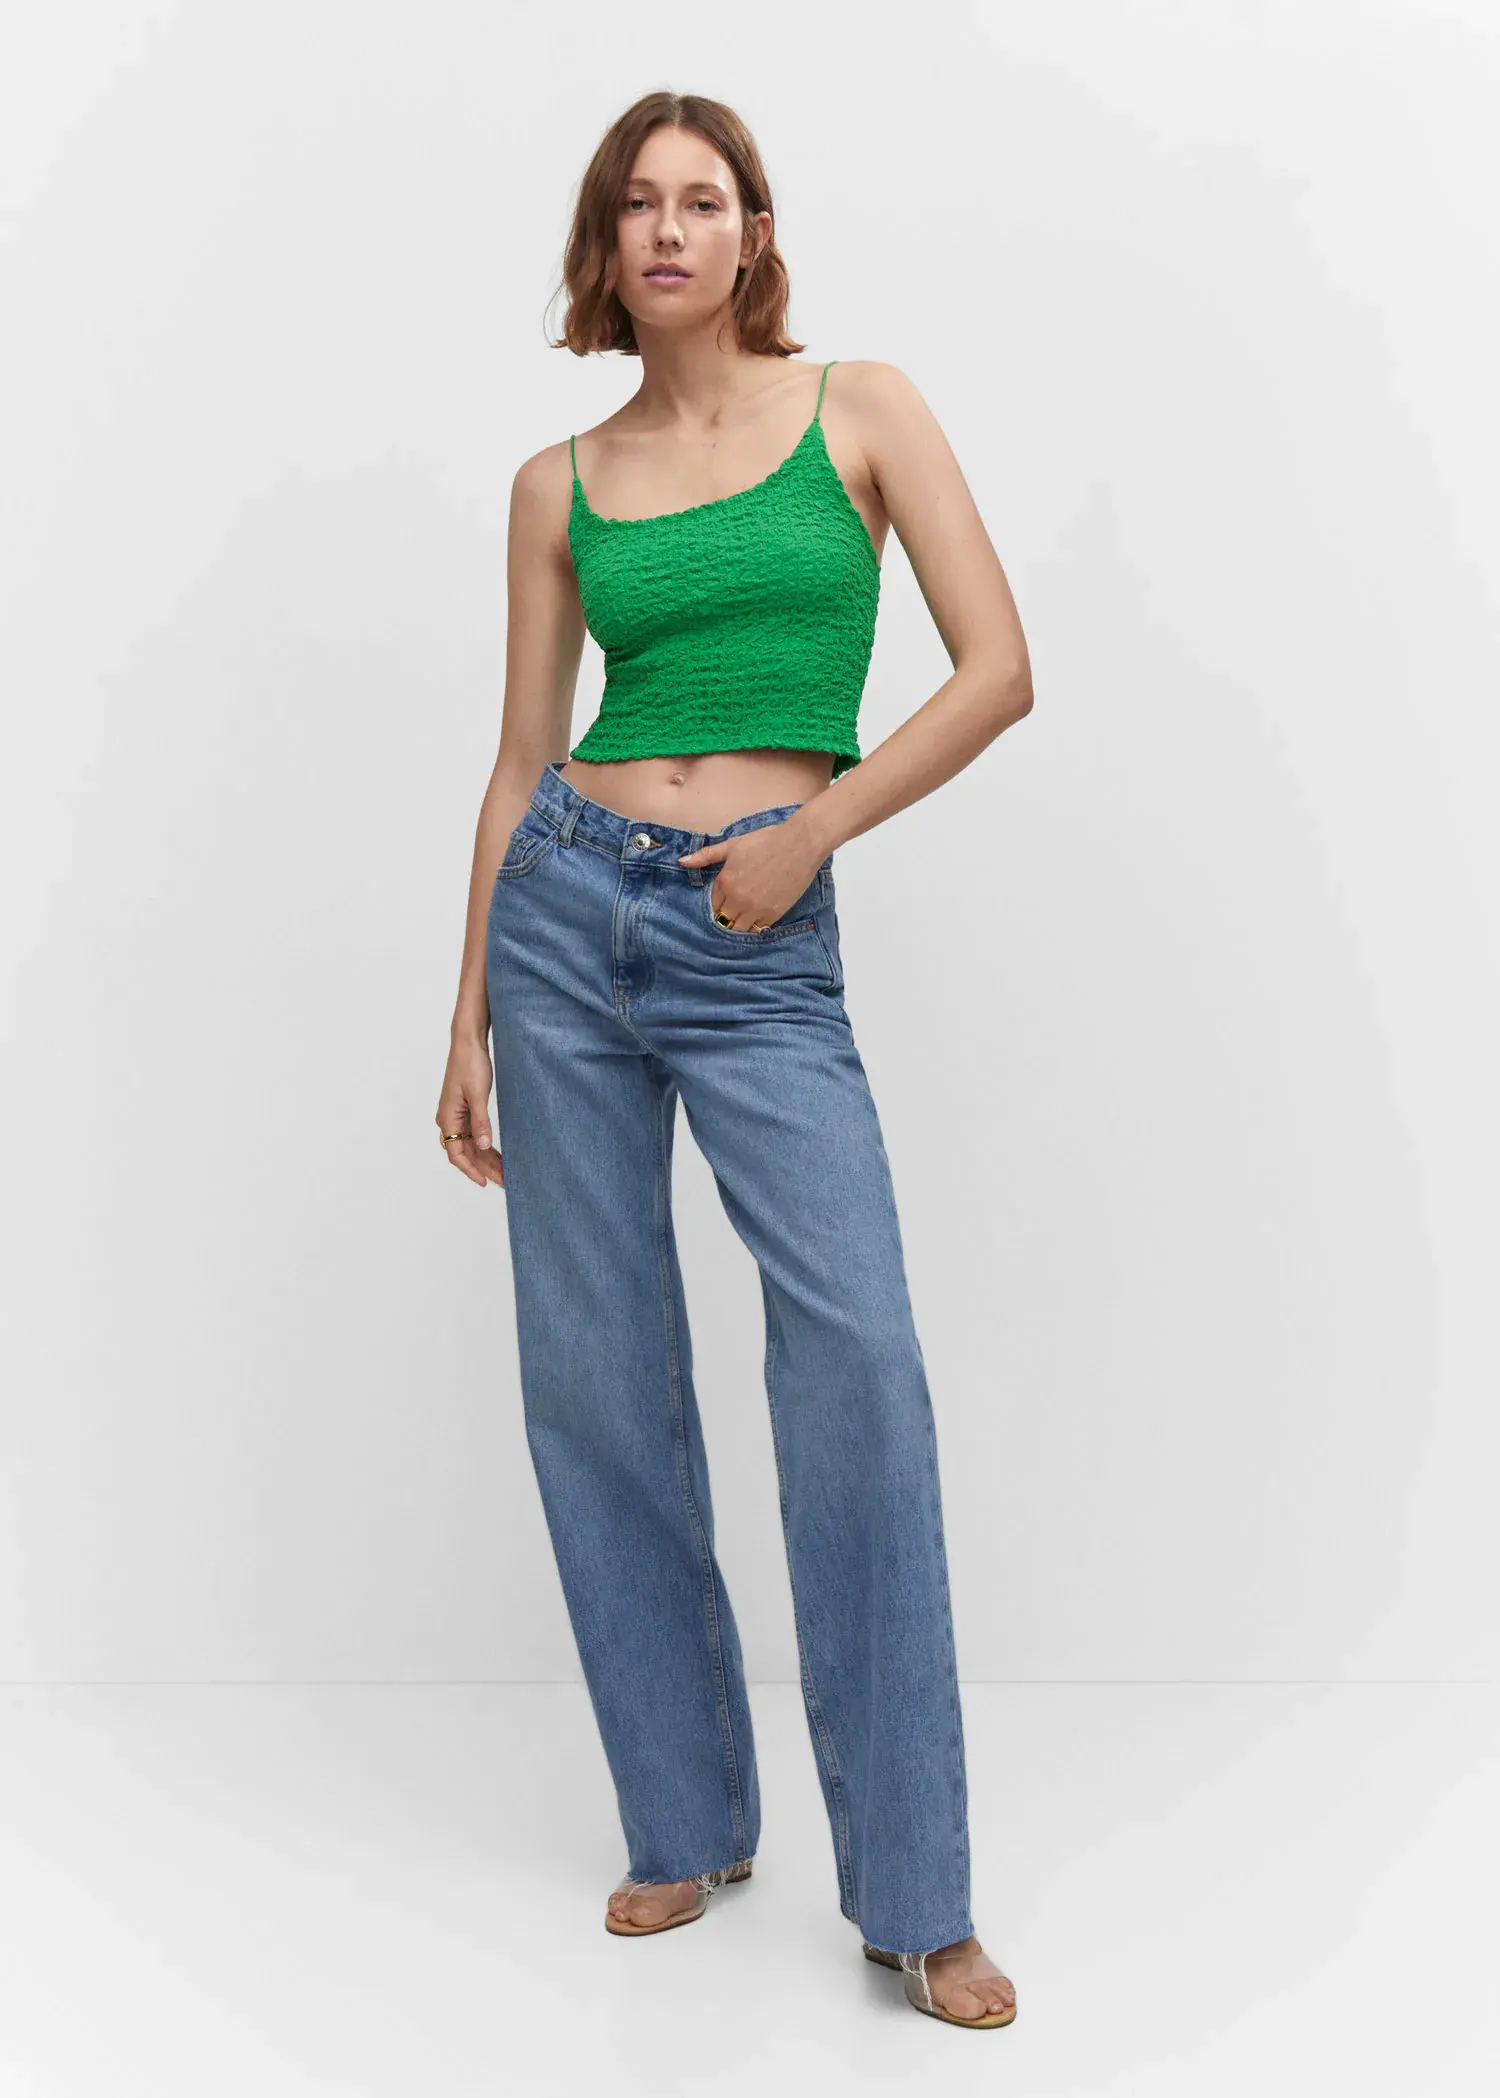 Mango Textured crop top. a woman in a green top and blue jeans. 